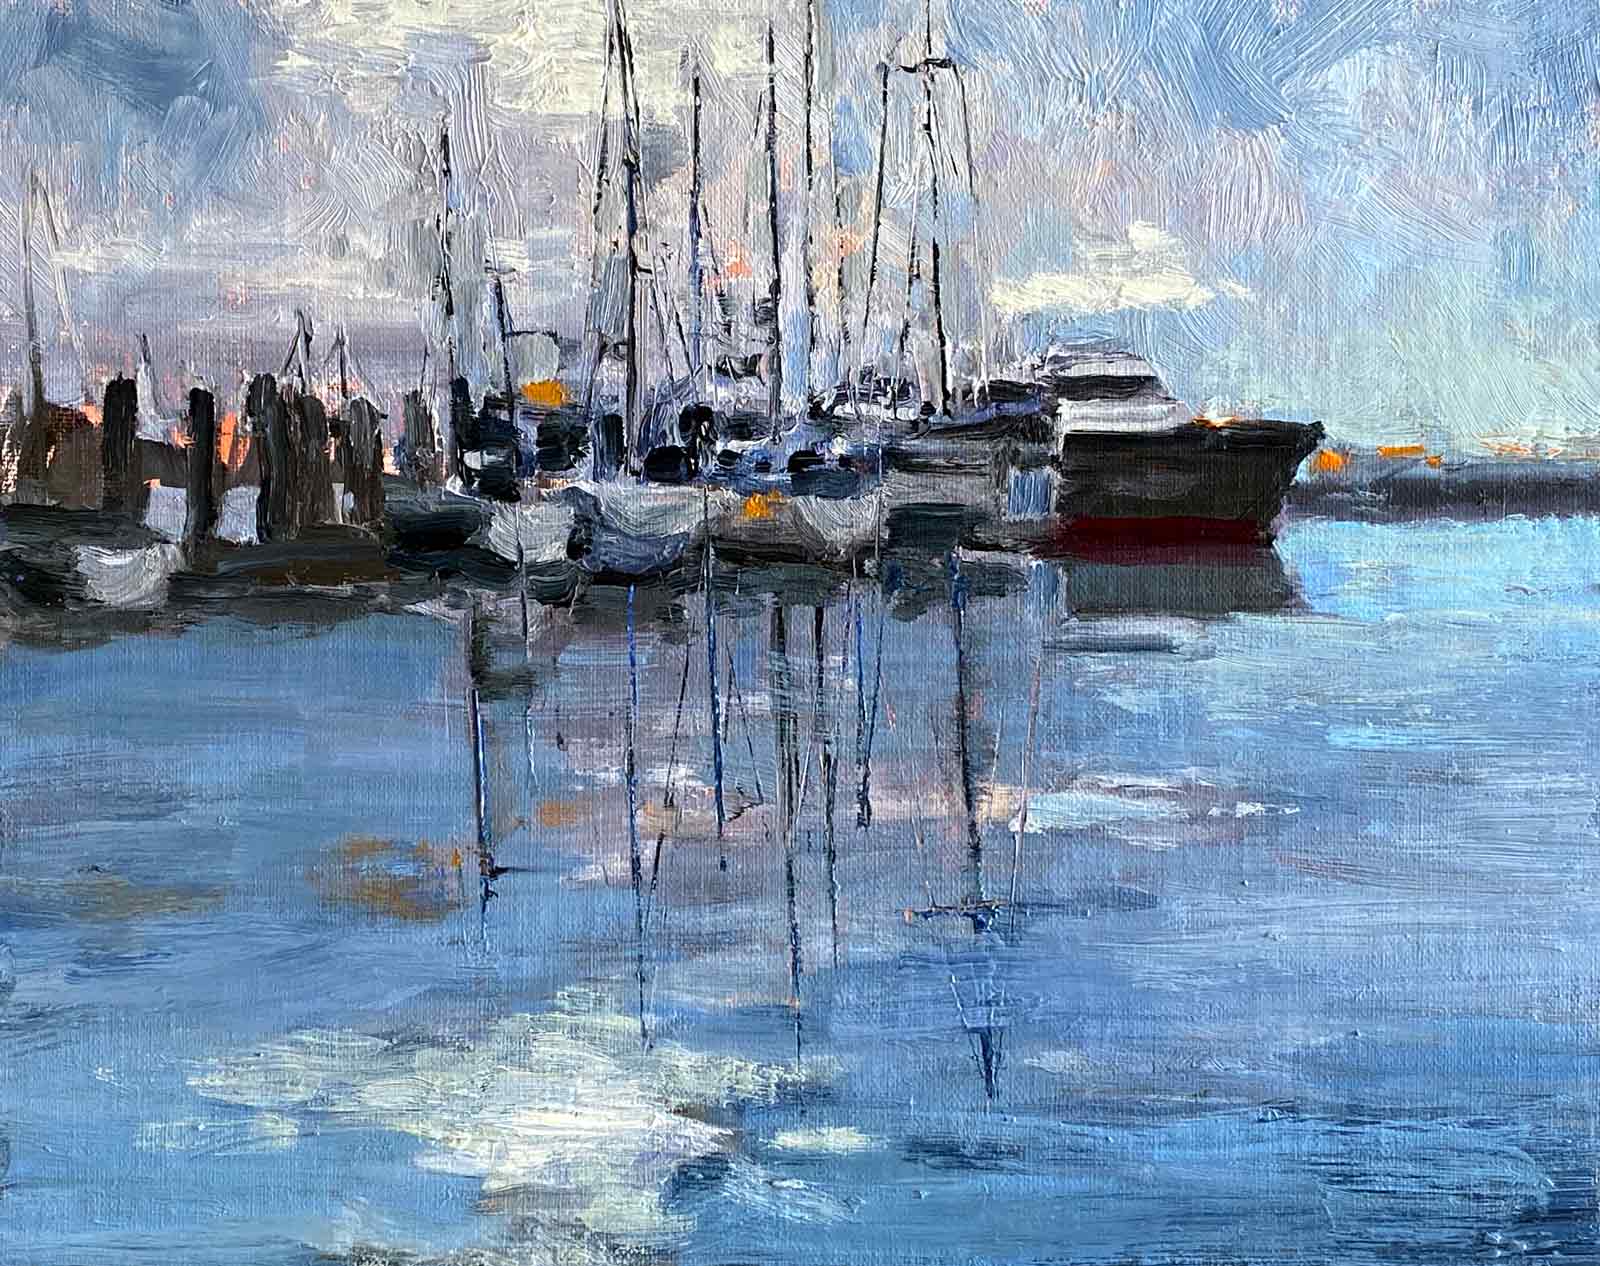 Rockport Harbor on the Gulf of Mexico oil painting by American Impressionist Shelly Wierzba.